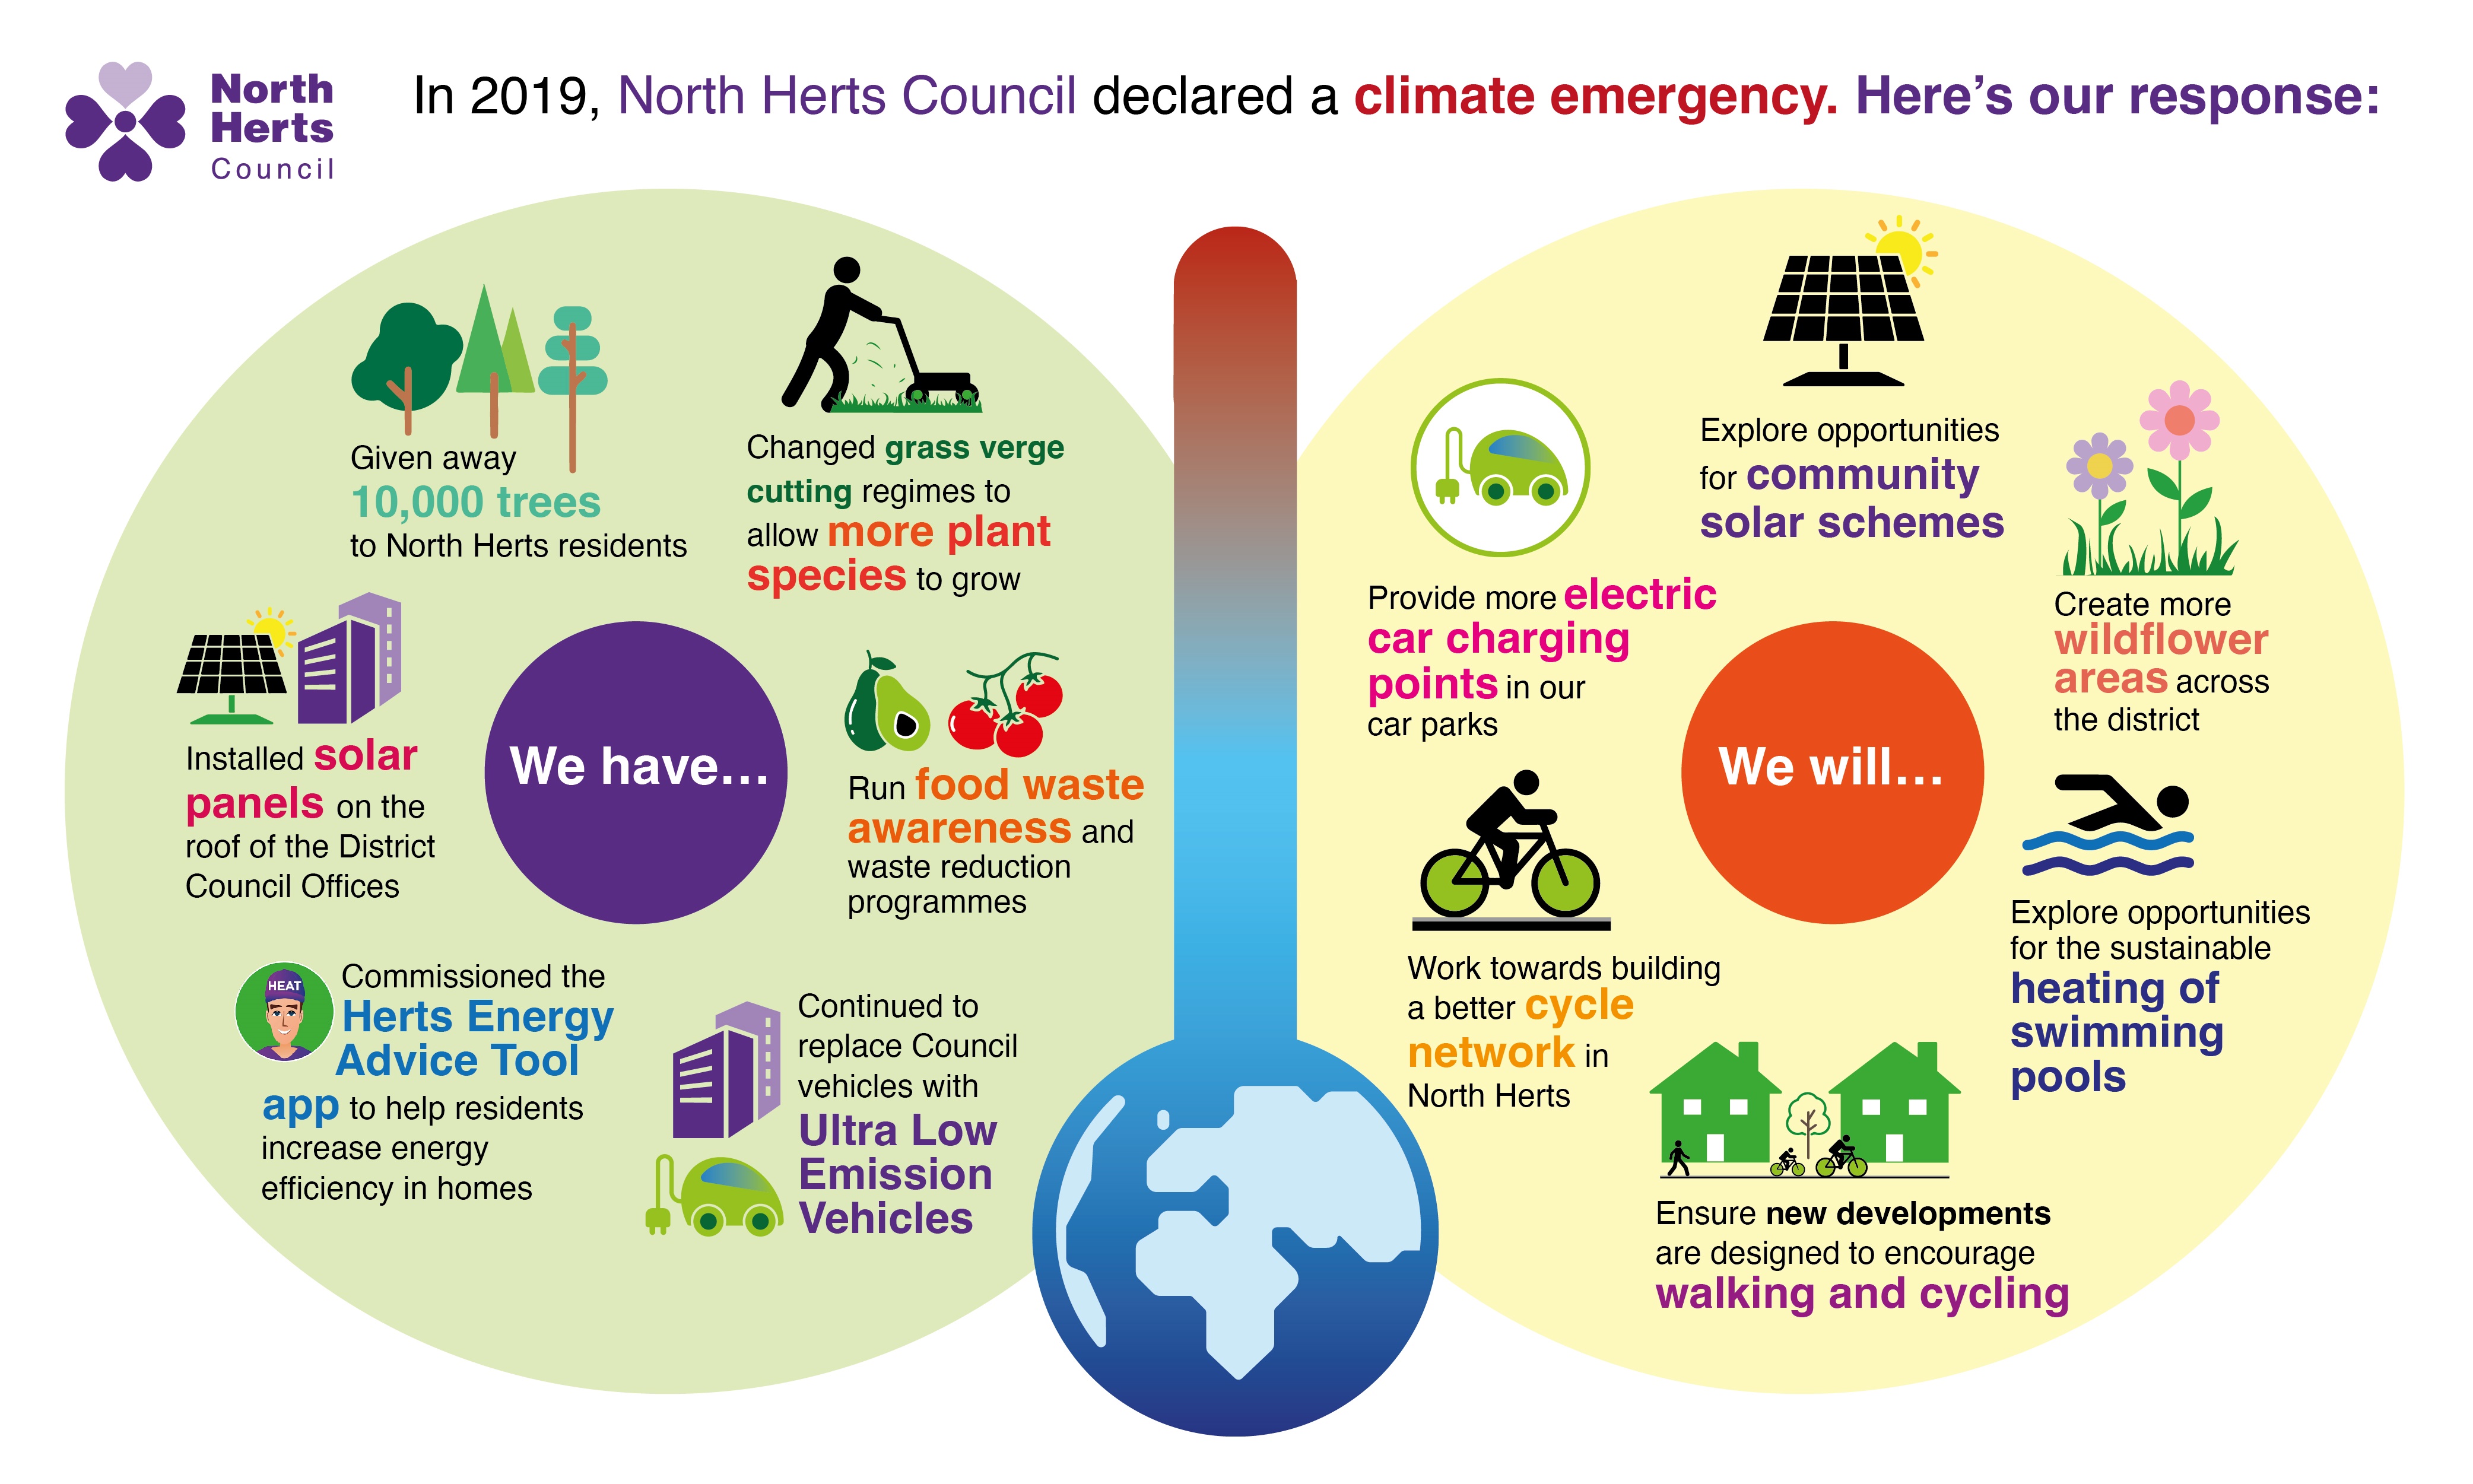 In 2019 North Herts Council declared a climate emergency. Here's our response: we have given away 10,000 trees to North Herts residents; changed grass verge cutting regimes to allow more plant species to grow; run food waste awareness and waste reduction programmes; continued to replace council vehicles with Ultra Low Emission Vehicles; commissioned the Herts Energy Advice Tool app to help residents increase energy efficiency at home; installed solar panels on the roof of the council offices. We will provide more electric car charging points in our car parks; explore opportunities for community solar schemes; create more wildflower areas across the district; explore opportunities for the sustainable heating of swimming pools; ensure new developments are designed to encourage walking and cycling; work towards building a better cycle network in North Herts.